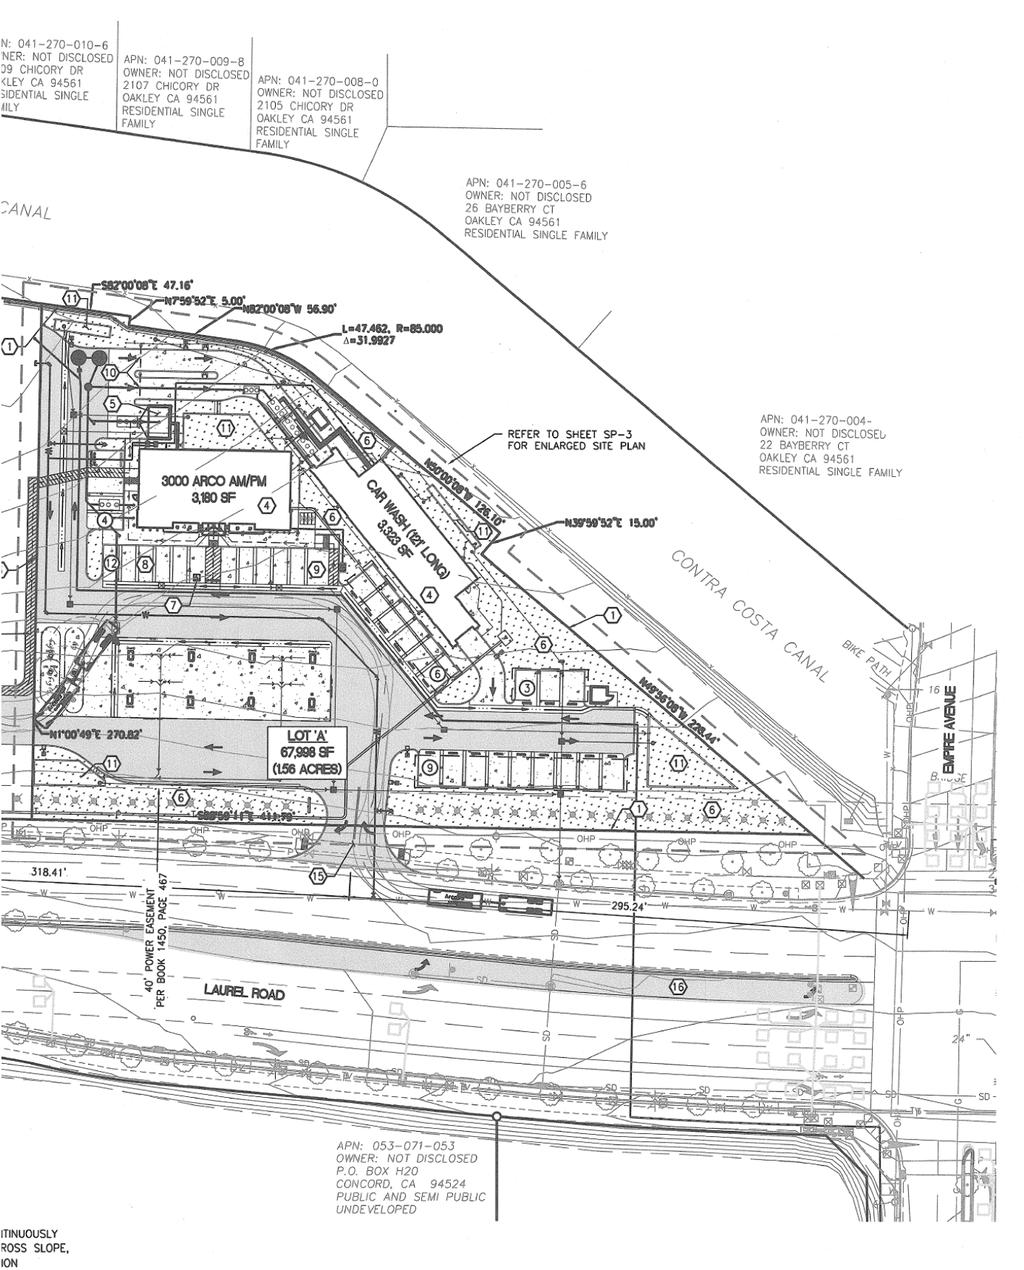 Figure 7. Site Plan Building/Site Design: The site plan within Attachment 3 of this report shows how the proposed project is laid out on the site.